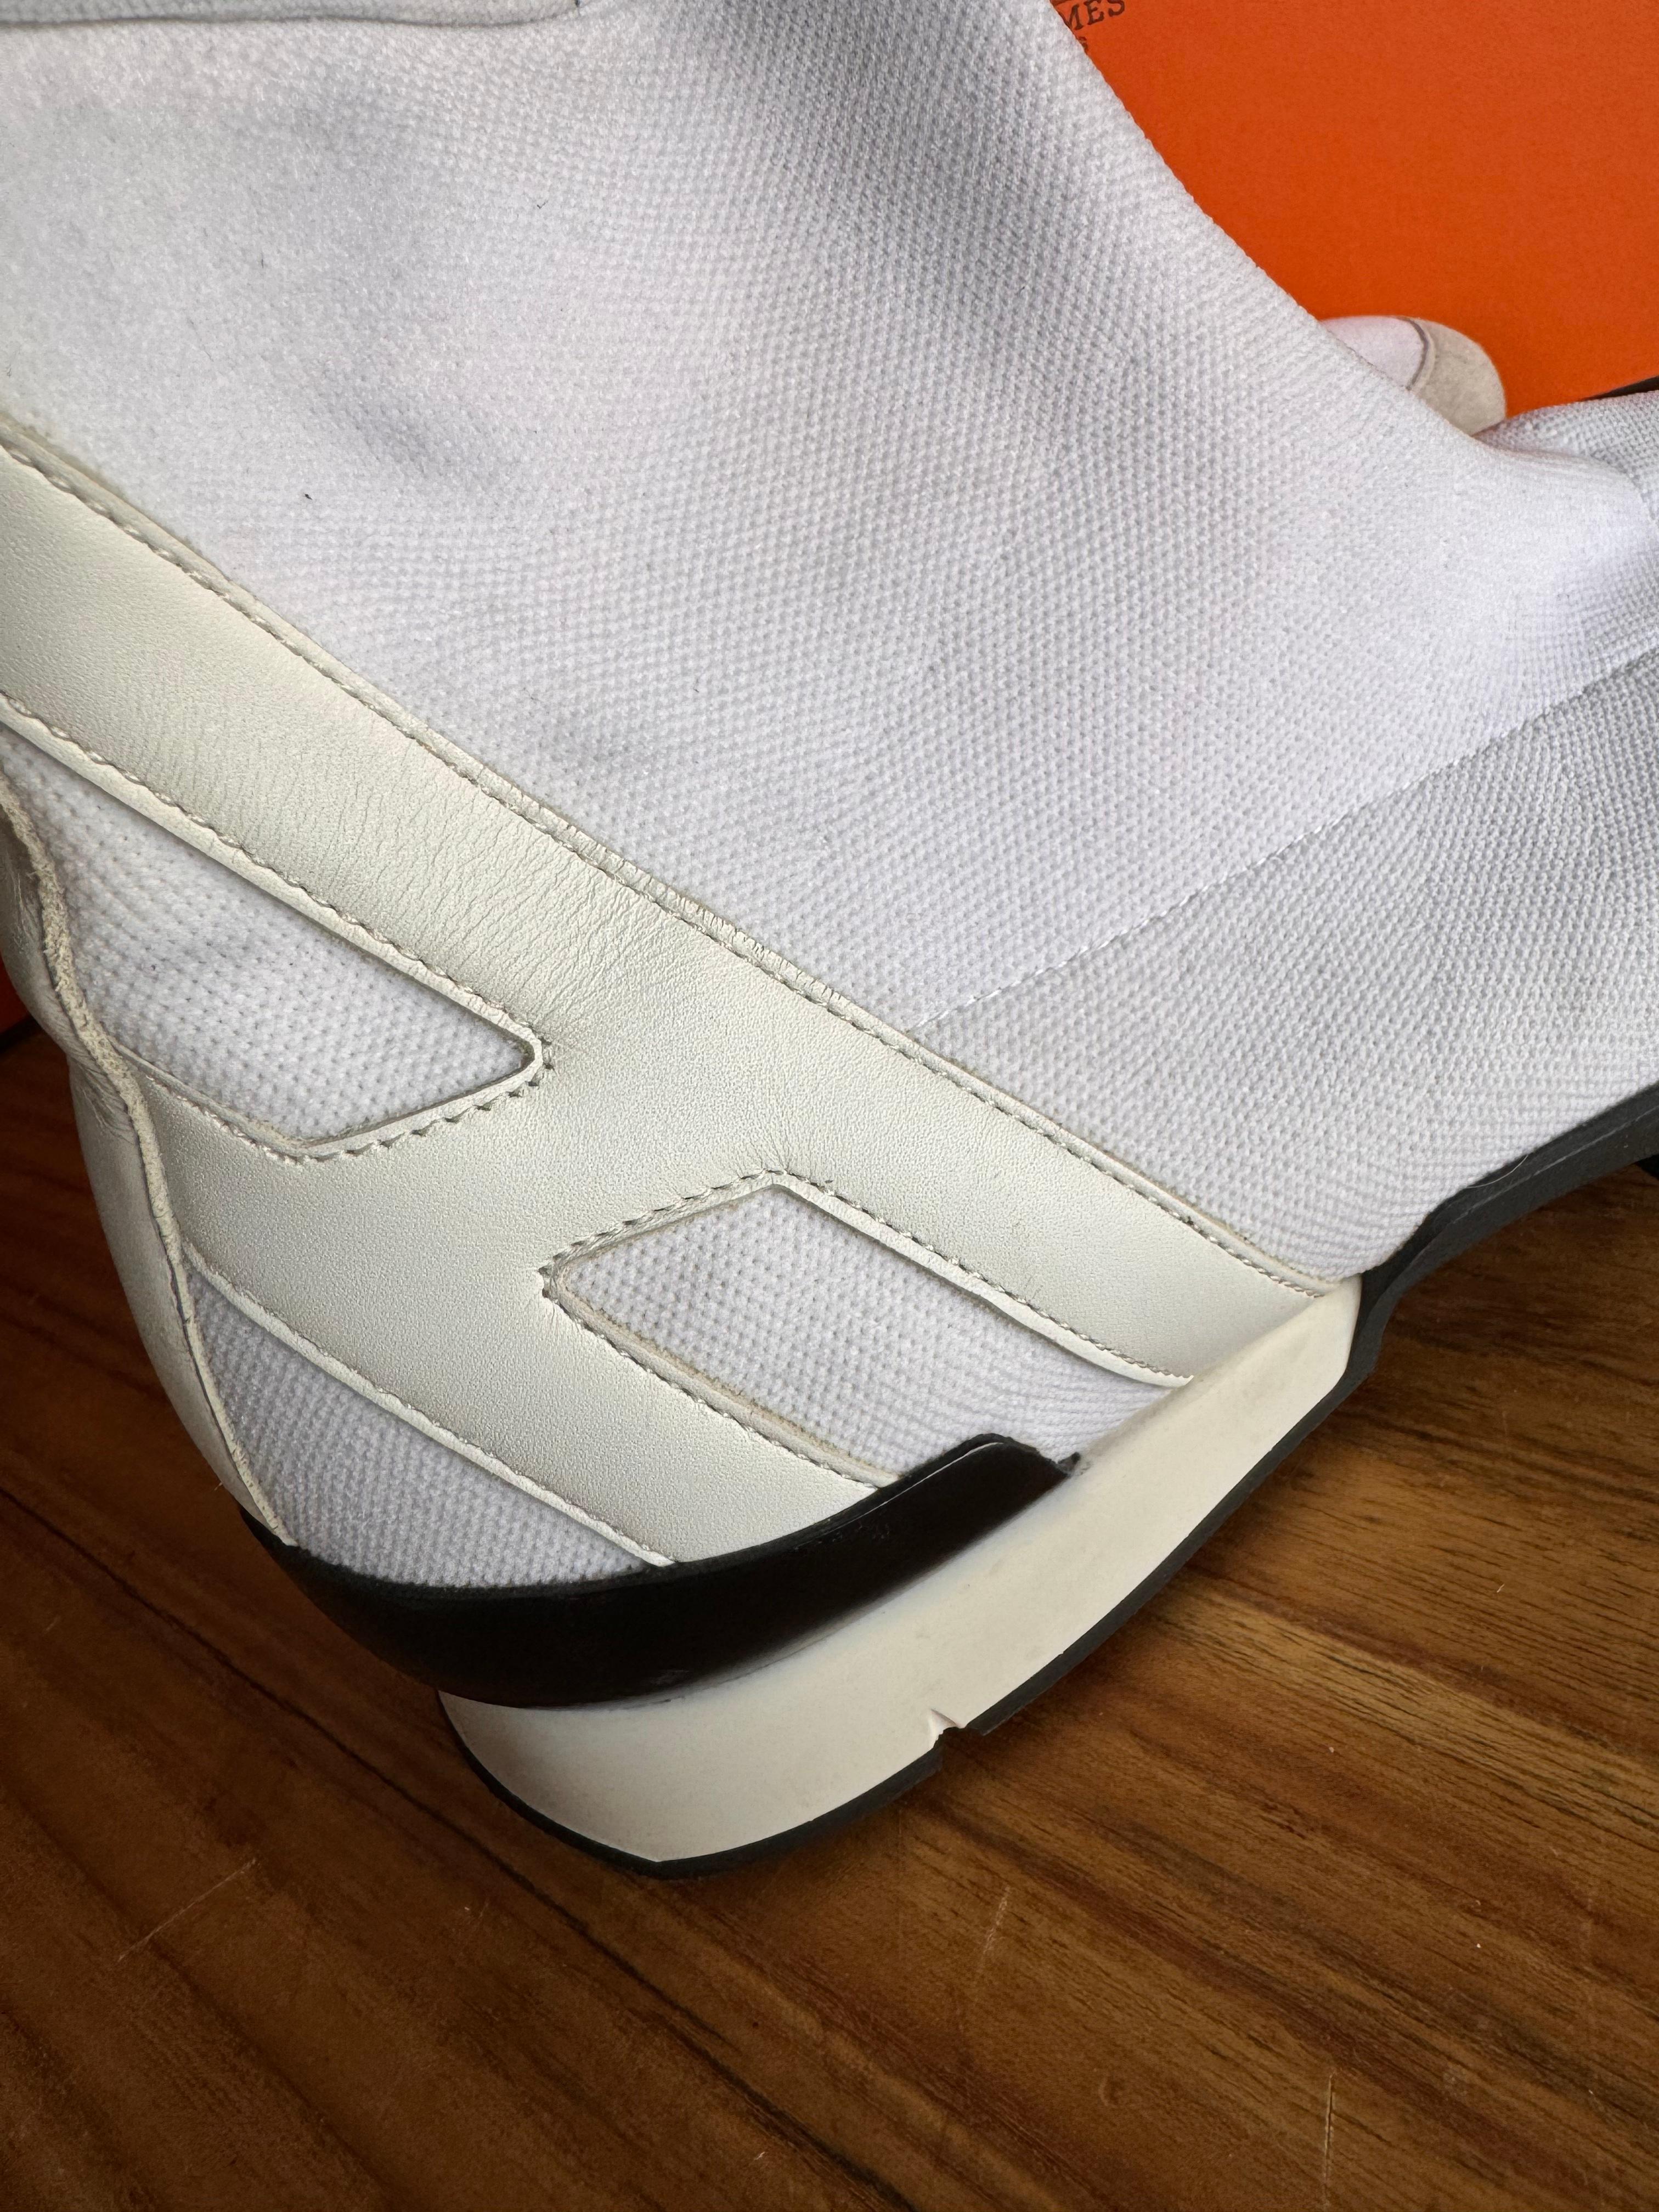 Introducing the Hermès Socks Sneaker, a masterpiece of contemporary footwear design. Created by the renowned luxury brand Hermès, these sneakers redefine the boundaries of casual elegance. In a pristine white color, they exude a sense of purity and